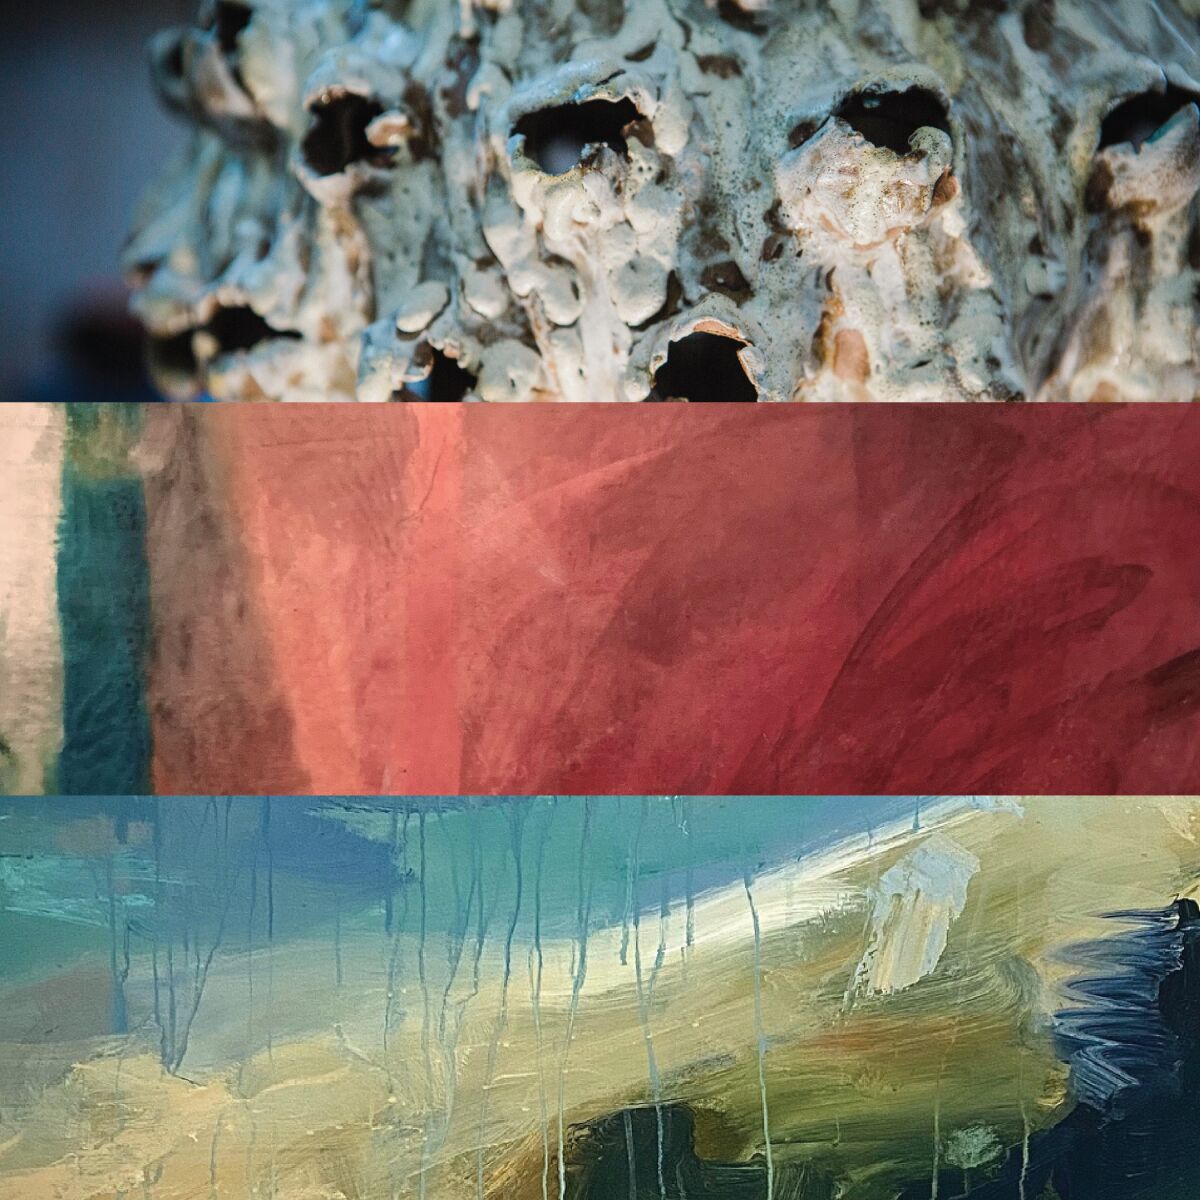 BFree Studio's exhibit “Painting and Clay: Abstracted Language” will be June 2-29 in La Jolla.